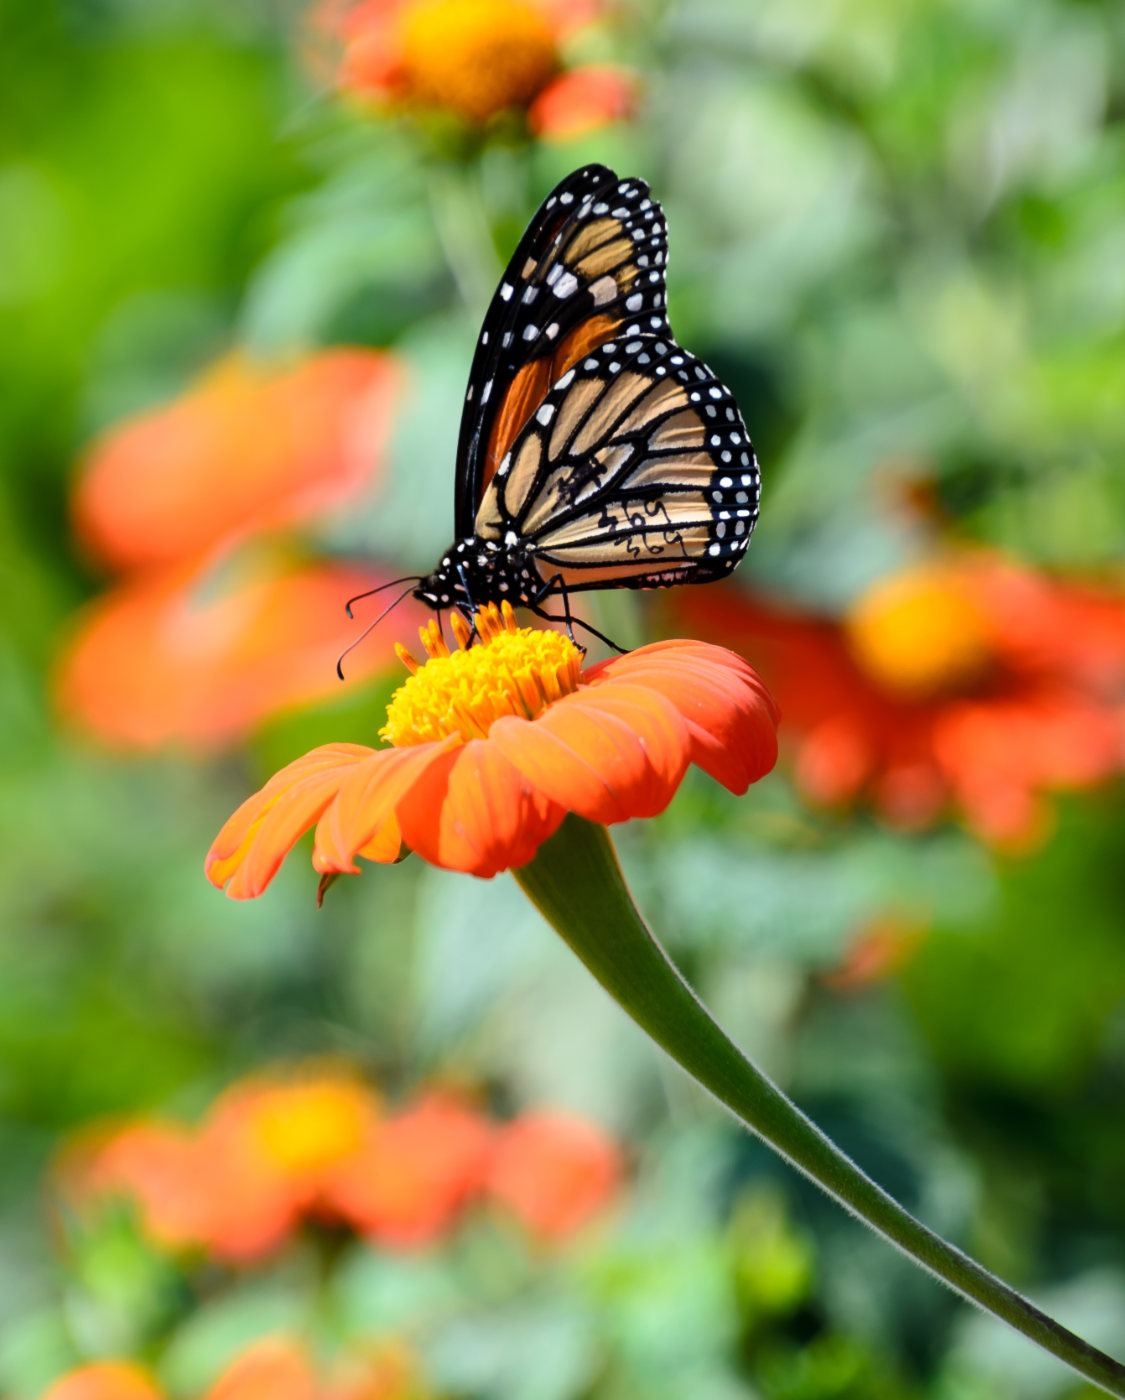 Red, black, and white butterfly atop yellow-orange flower